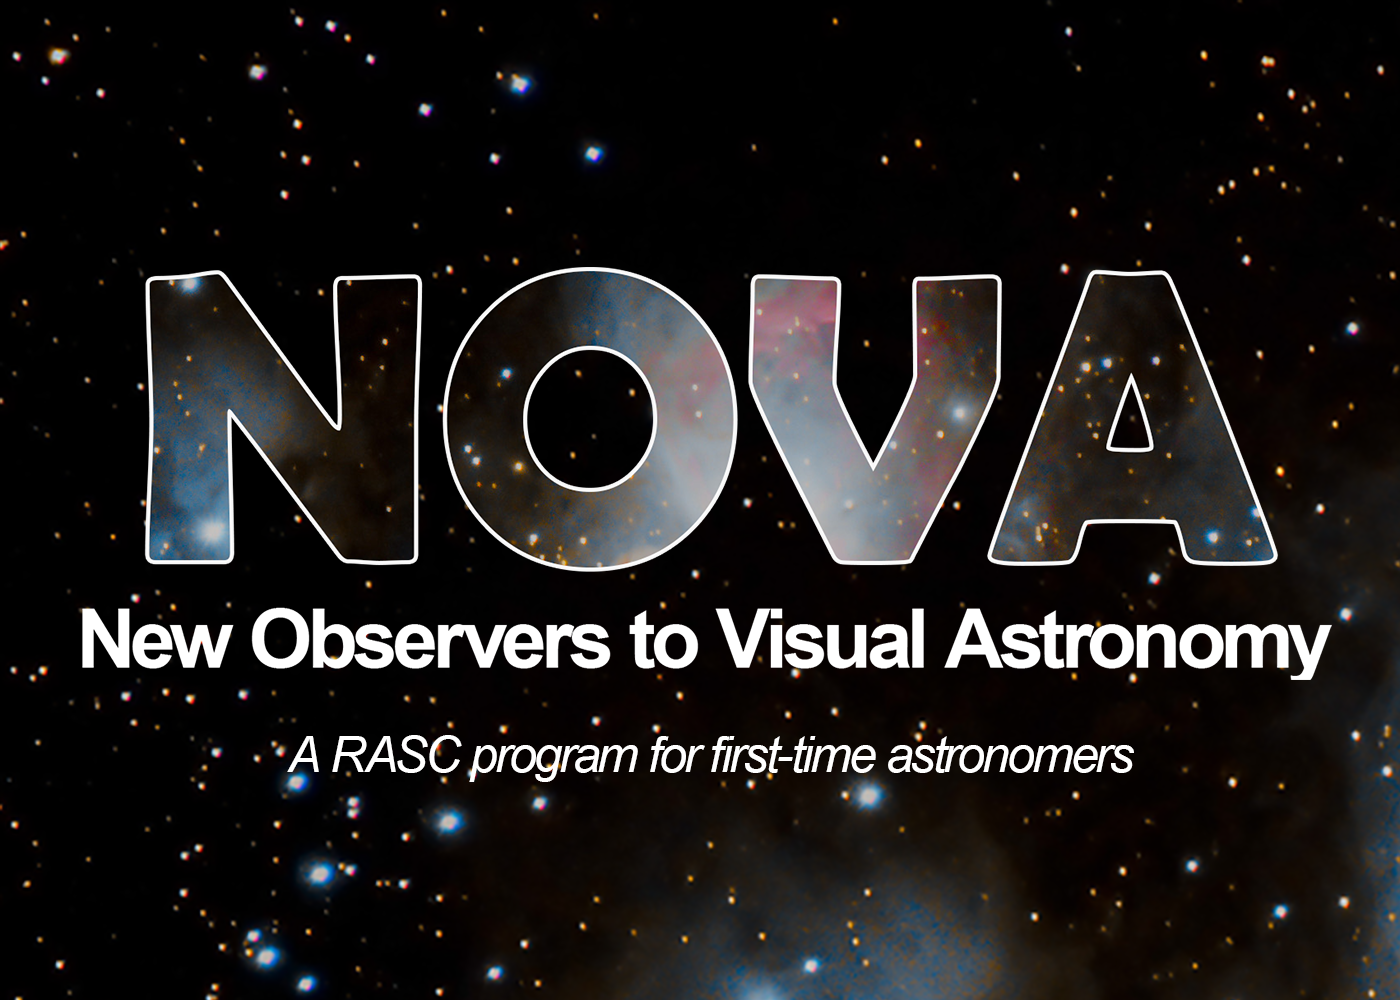 Coming Soon... NOVA (New Observers to Visual Astronomy) A Program for first time astronomers. Launching Early 2022